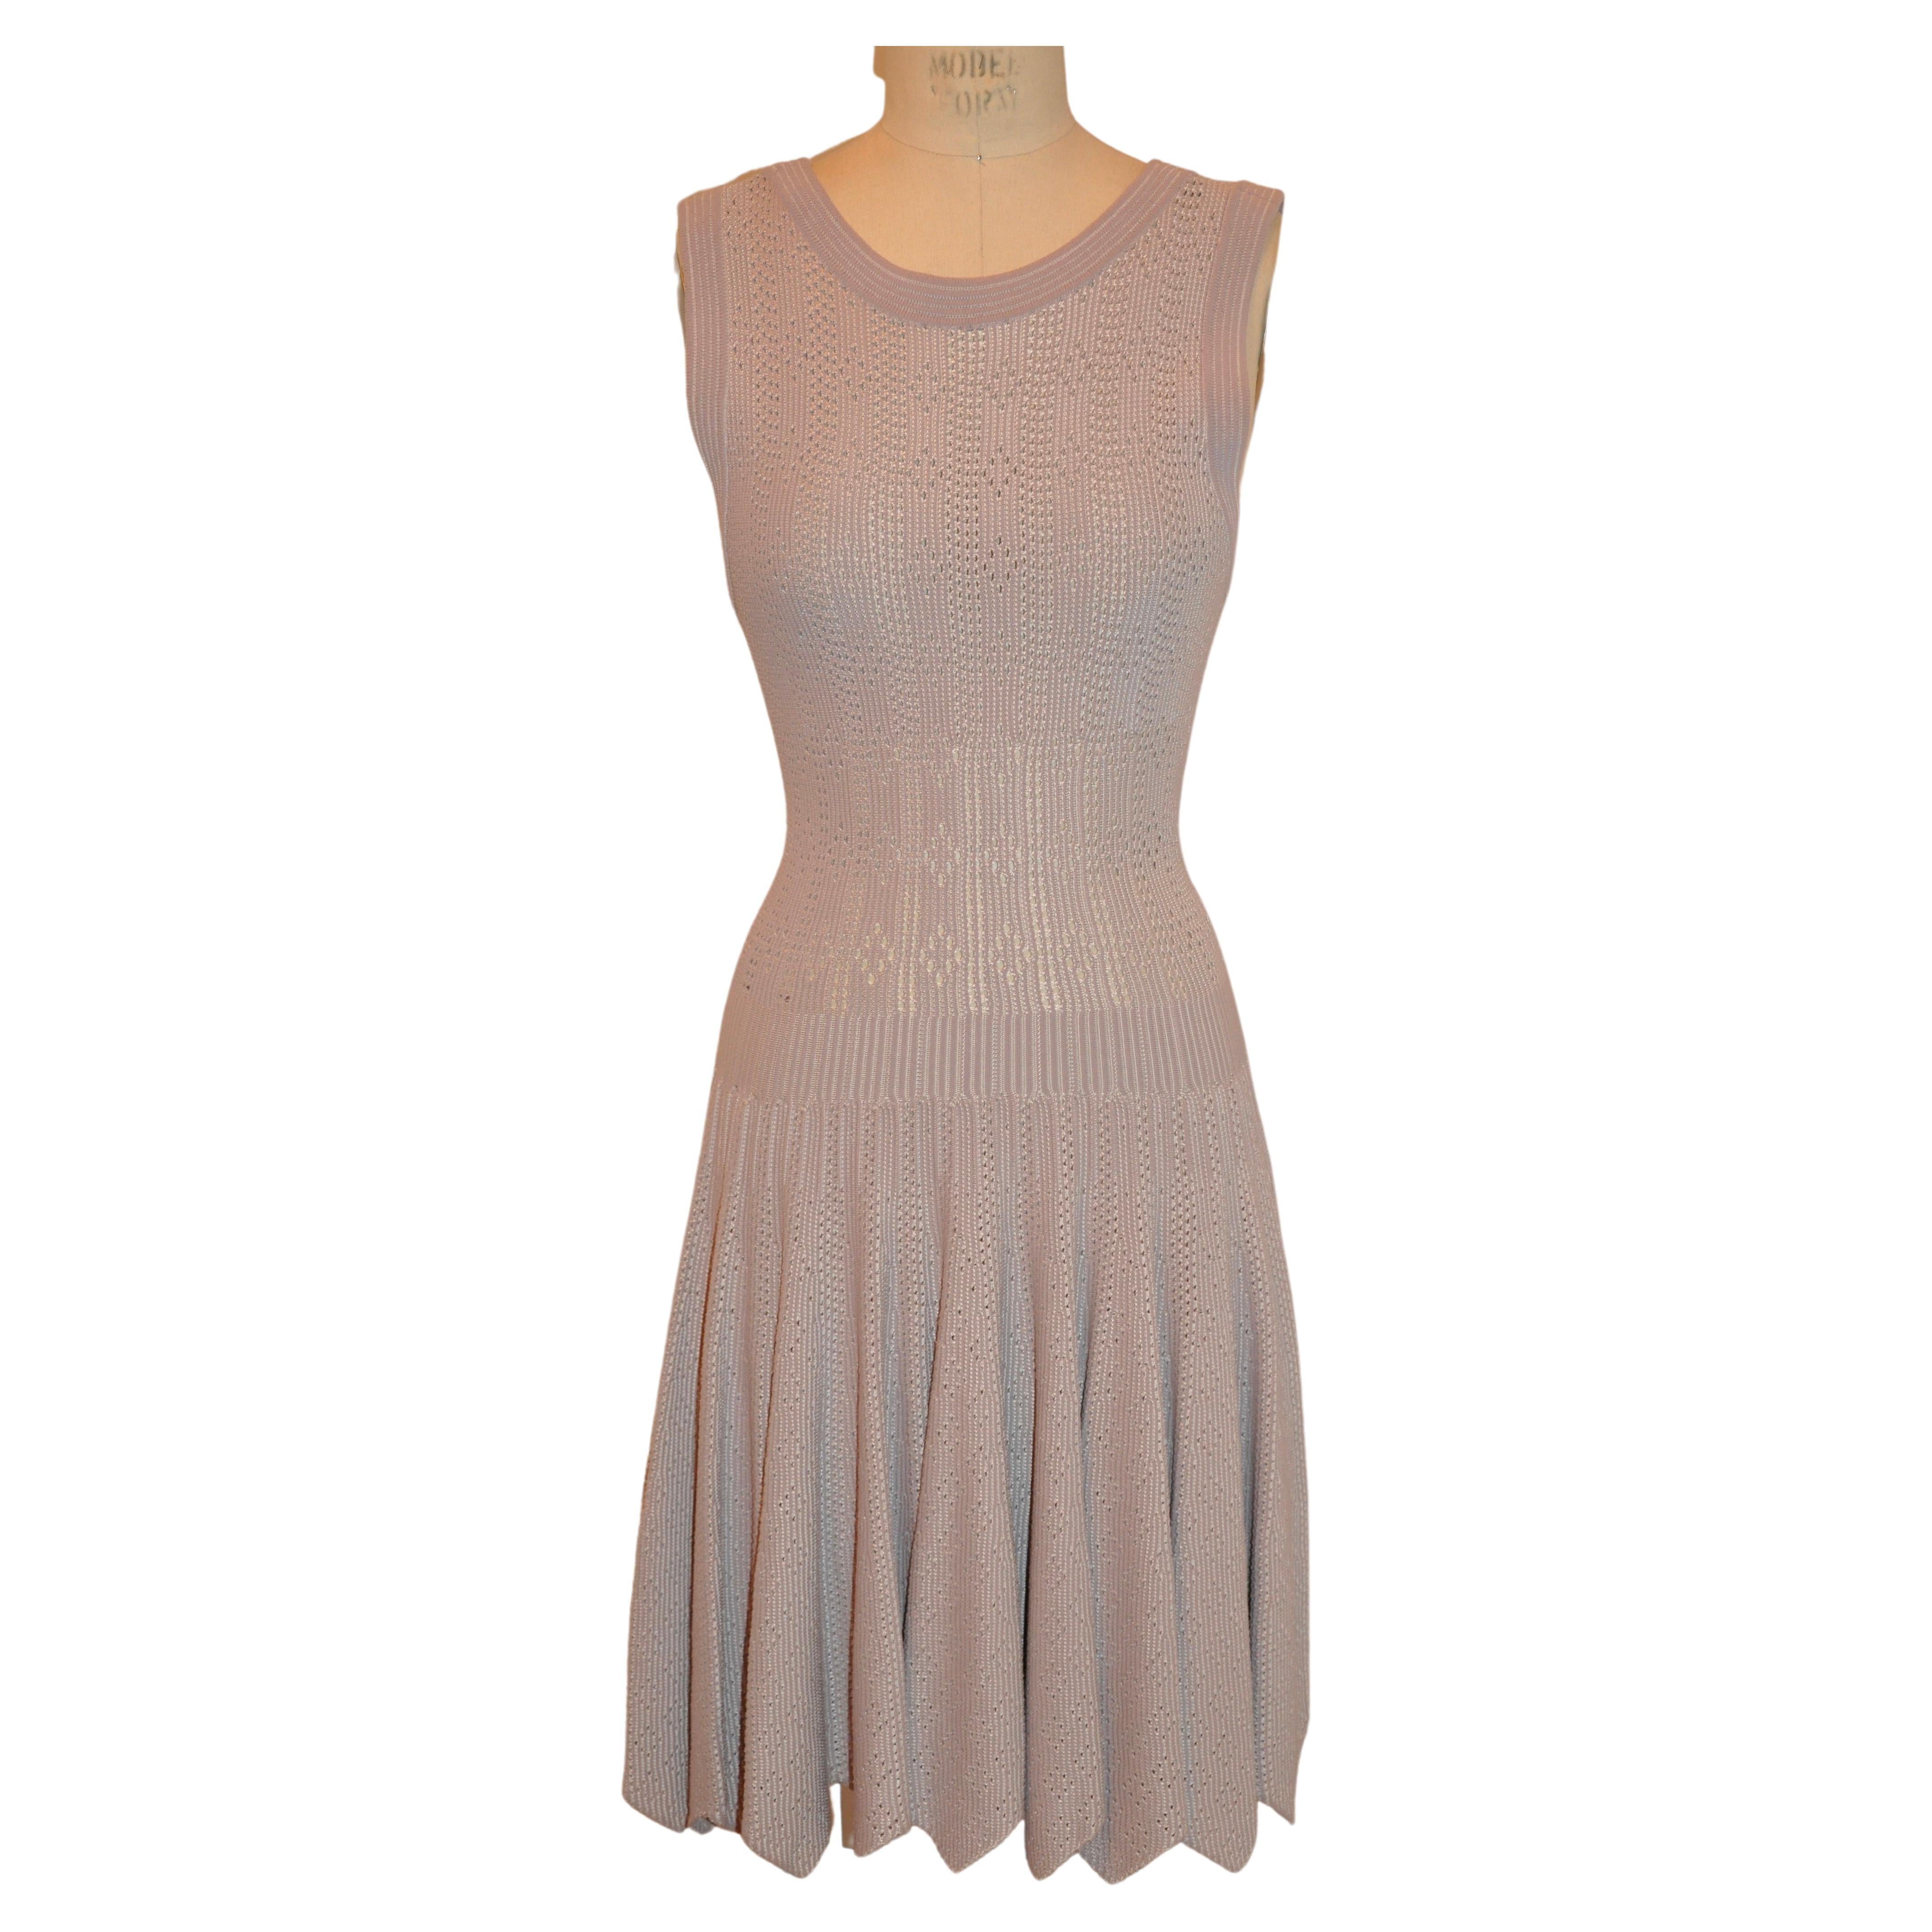 Rare Azzedine Alaia Signature Fawn-Hue Form-Fitting Eyelet Accented Swing Dress For Sale